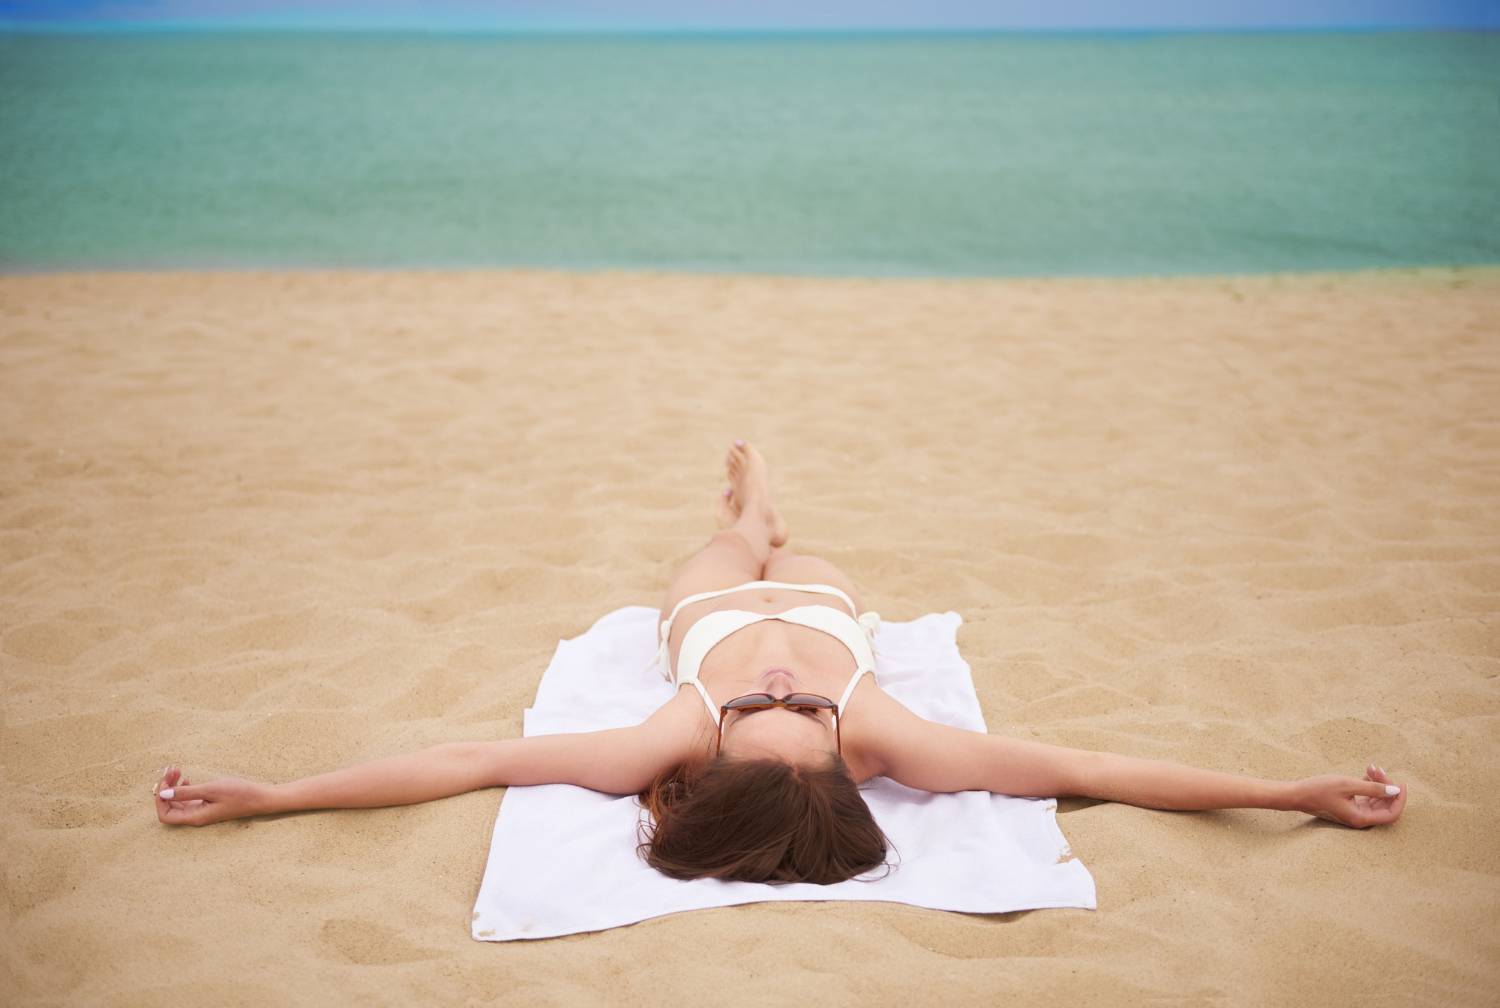 A woman in a white bikini relaxes on a towel on a sandy beach, with the serene turquoise ocean stretching out in the background.